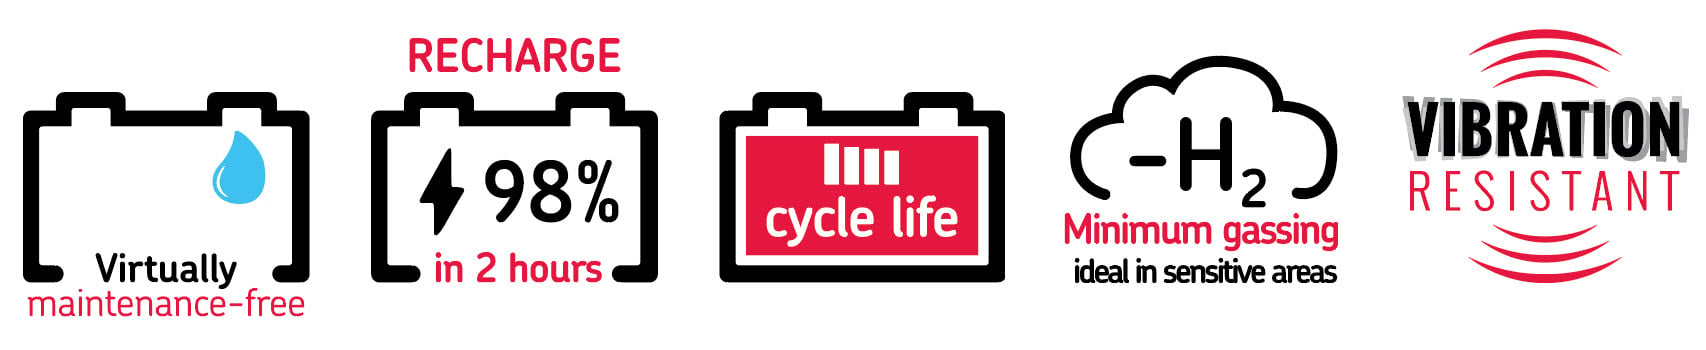 Virtually maintenance-free, recharge 98% in 2 hours, cycle life icons